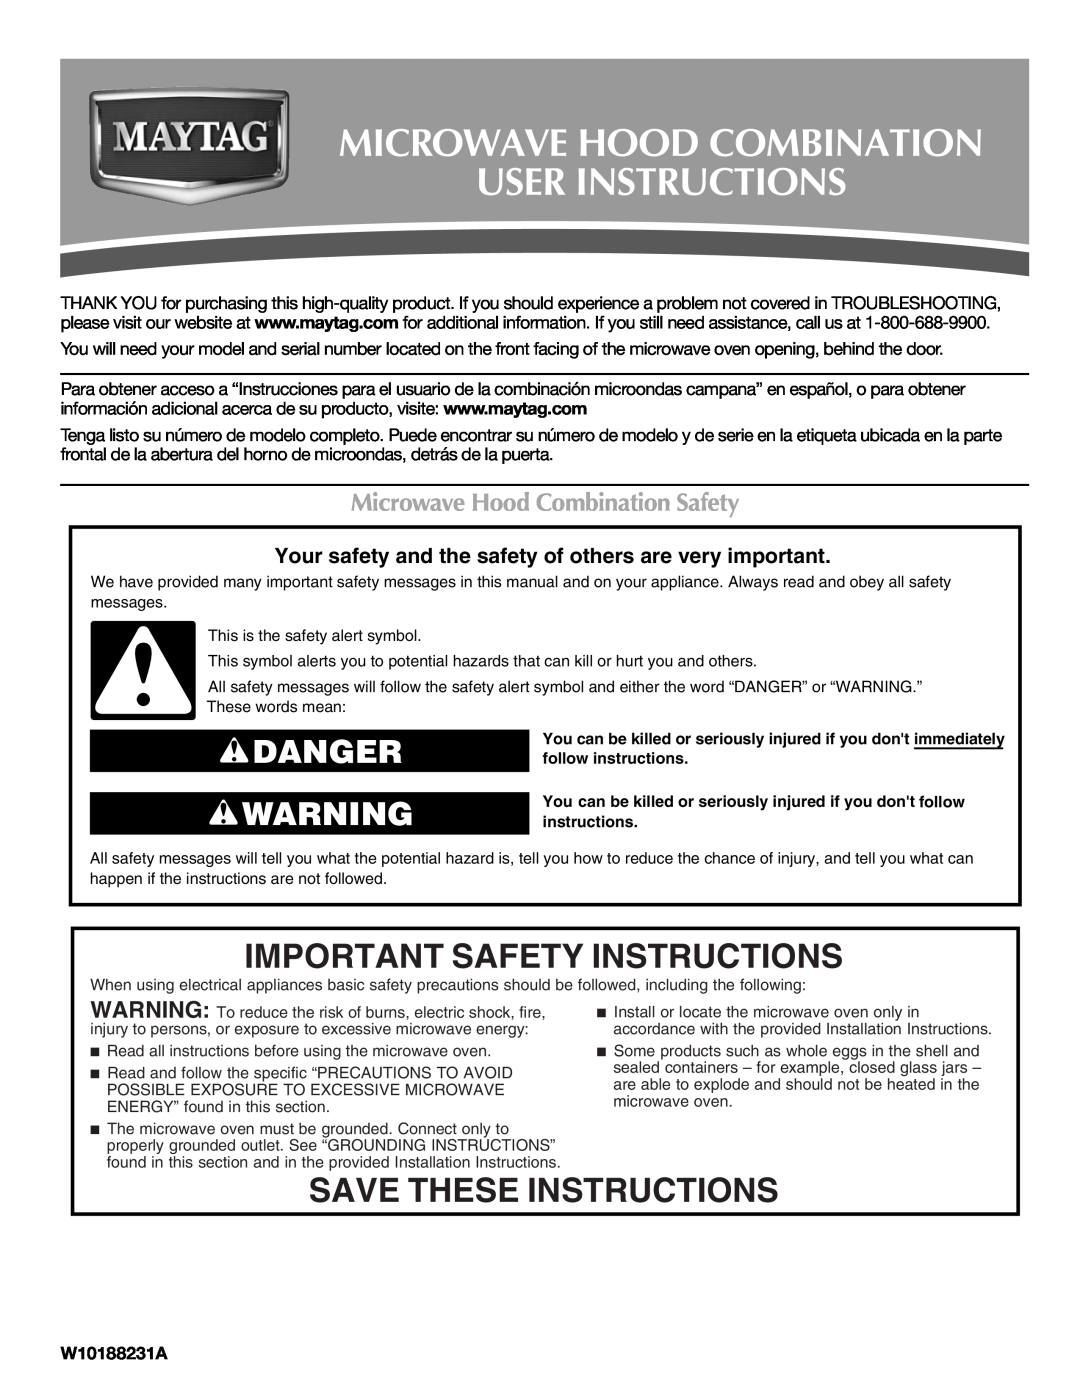 Maytag W10188231A, W10188941A important safety instructions Important Safety Instructions, Save These Instructions, Danger 